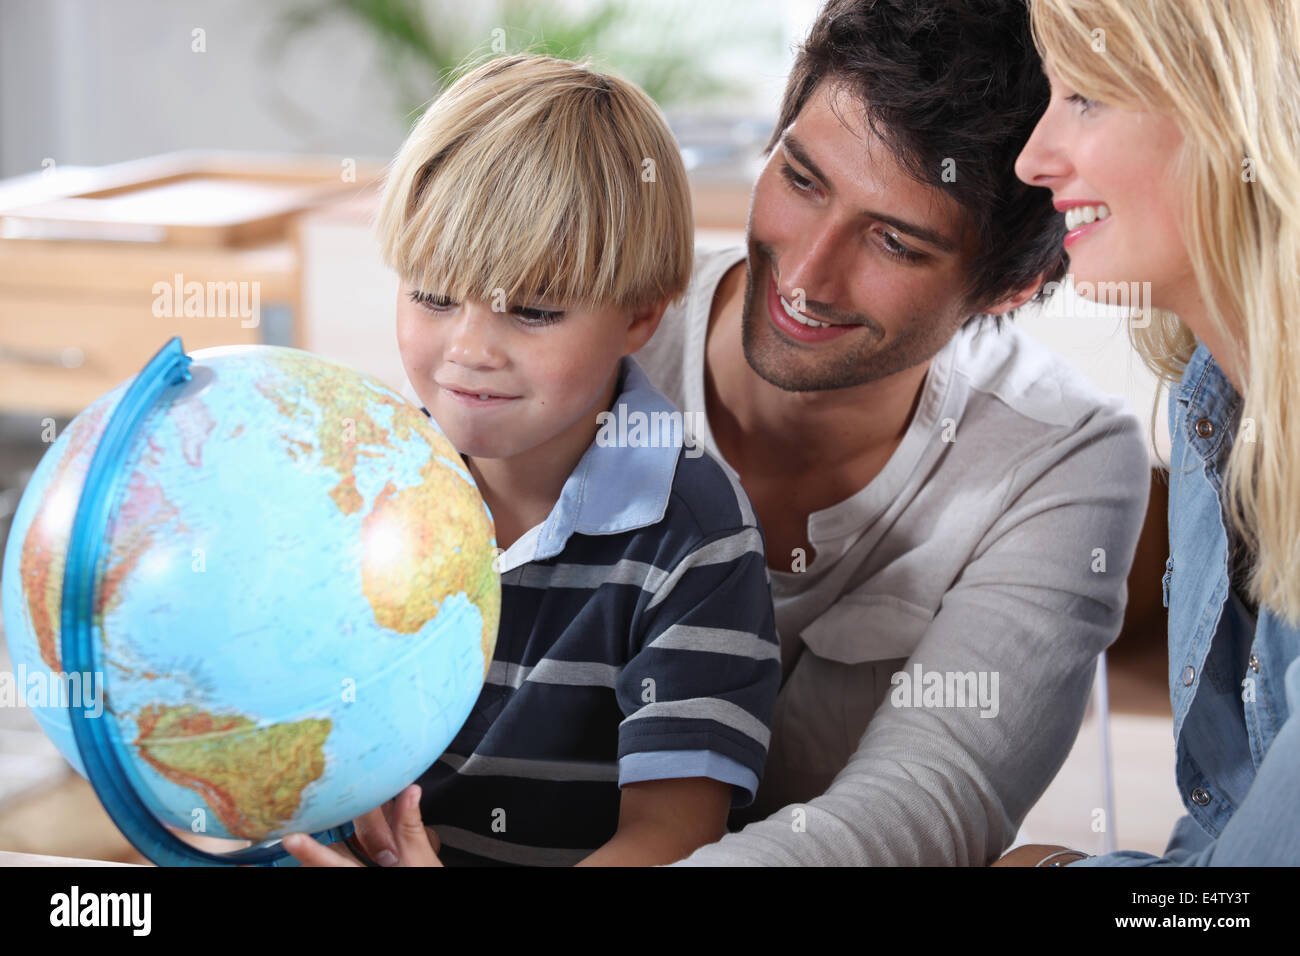 Parents at school with their child Stock Photo